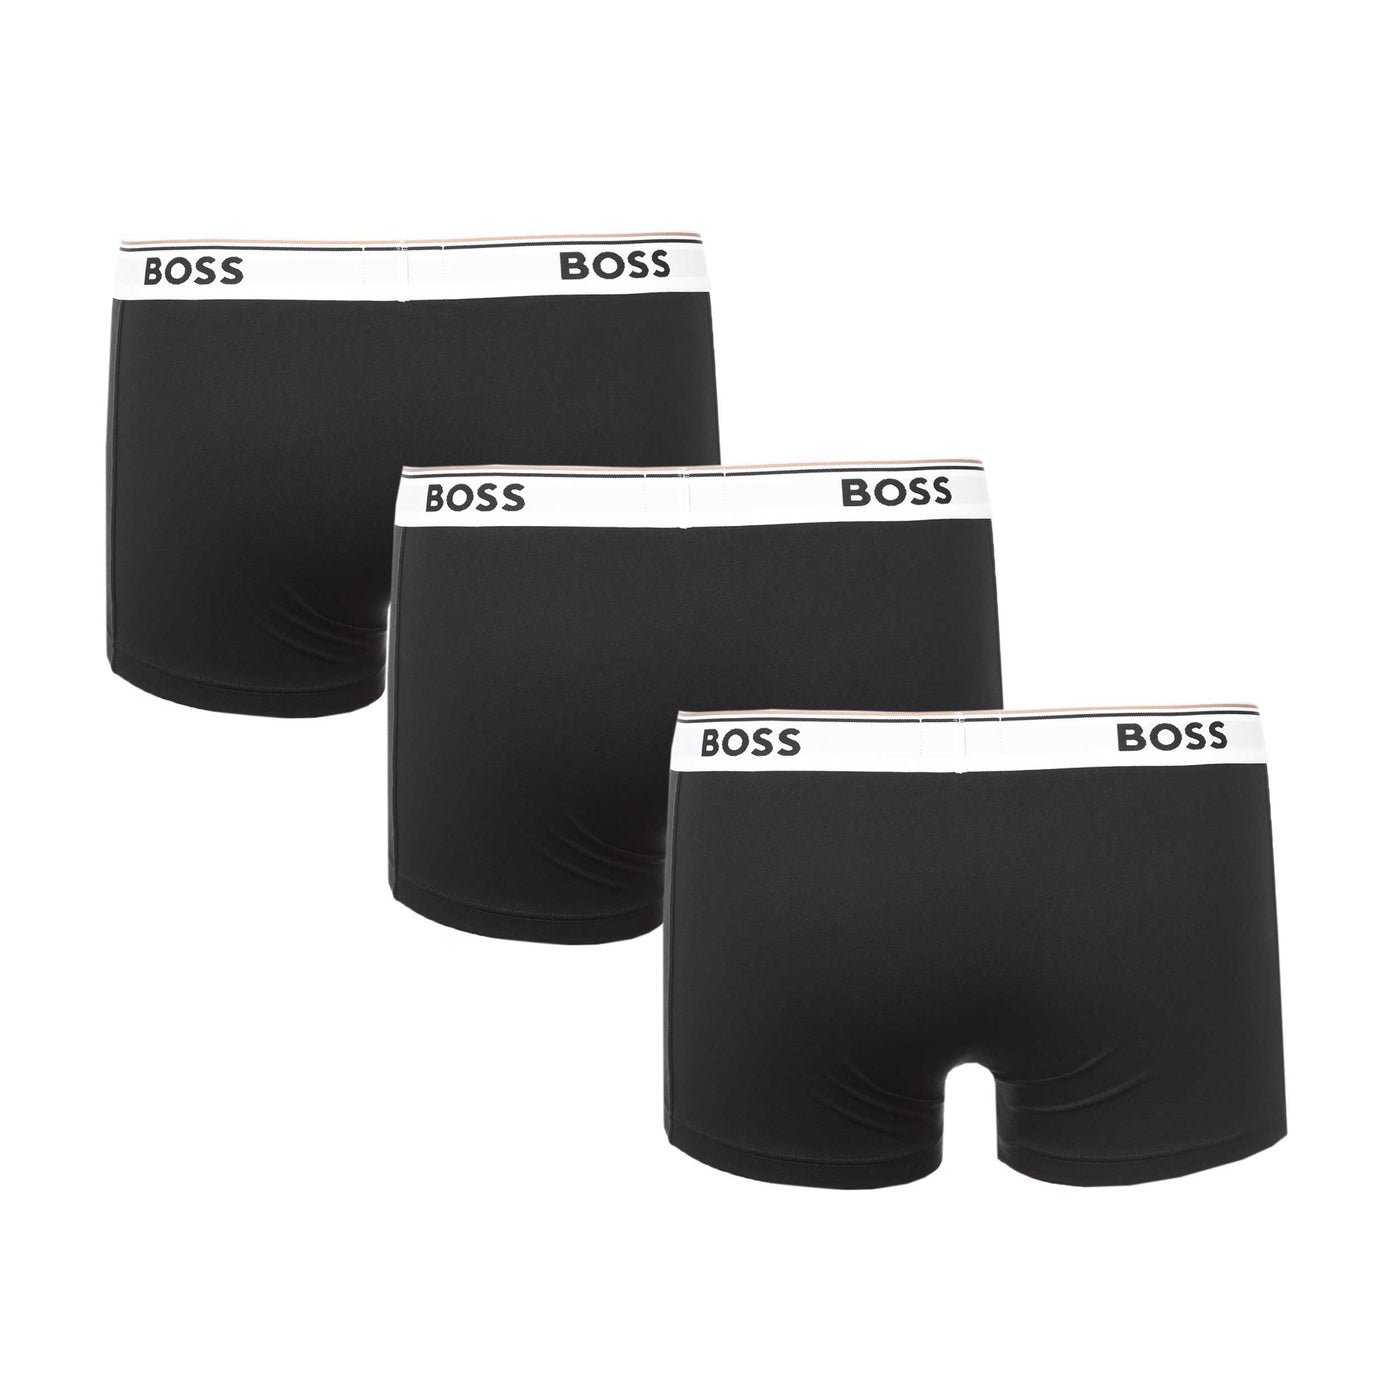 BOSS Trunk 3P Power Underwear in Black with White Band Back